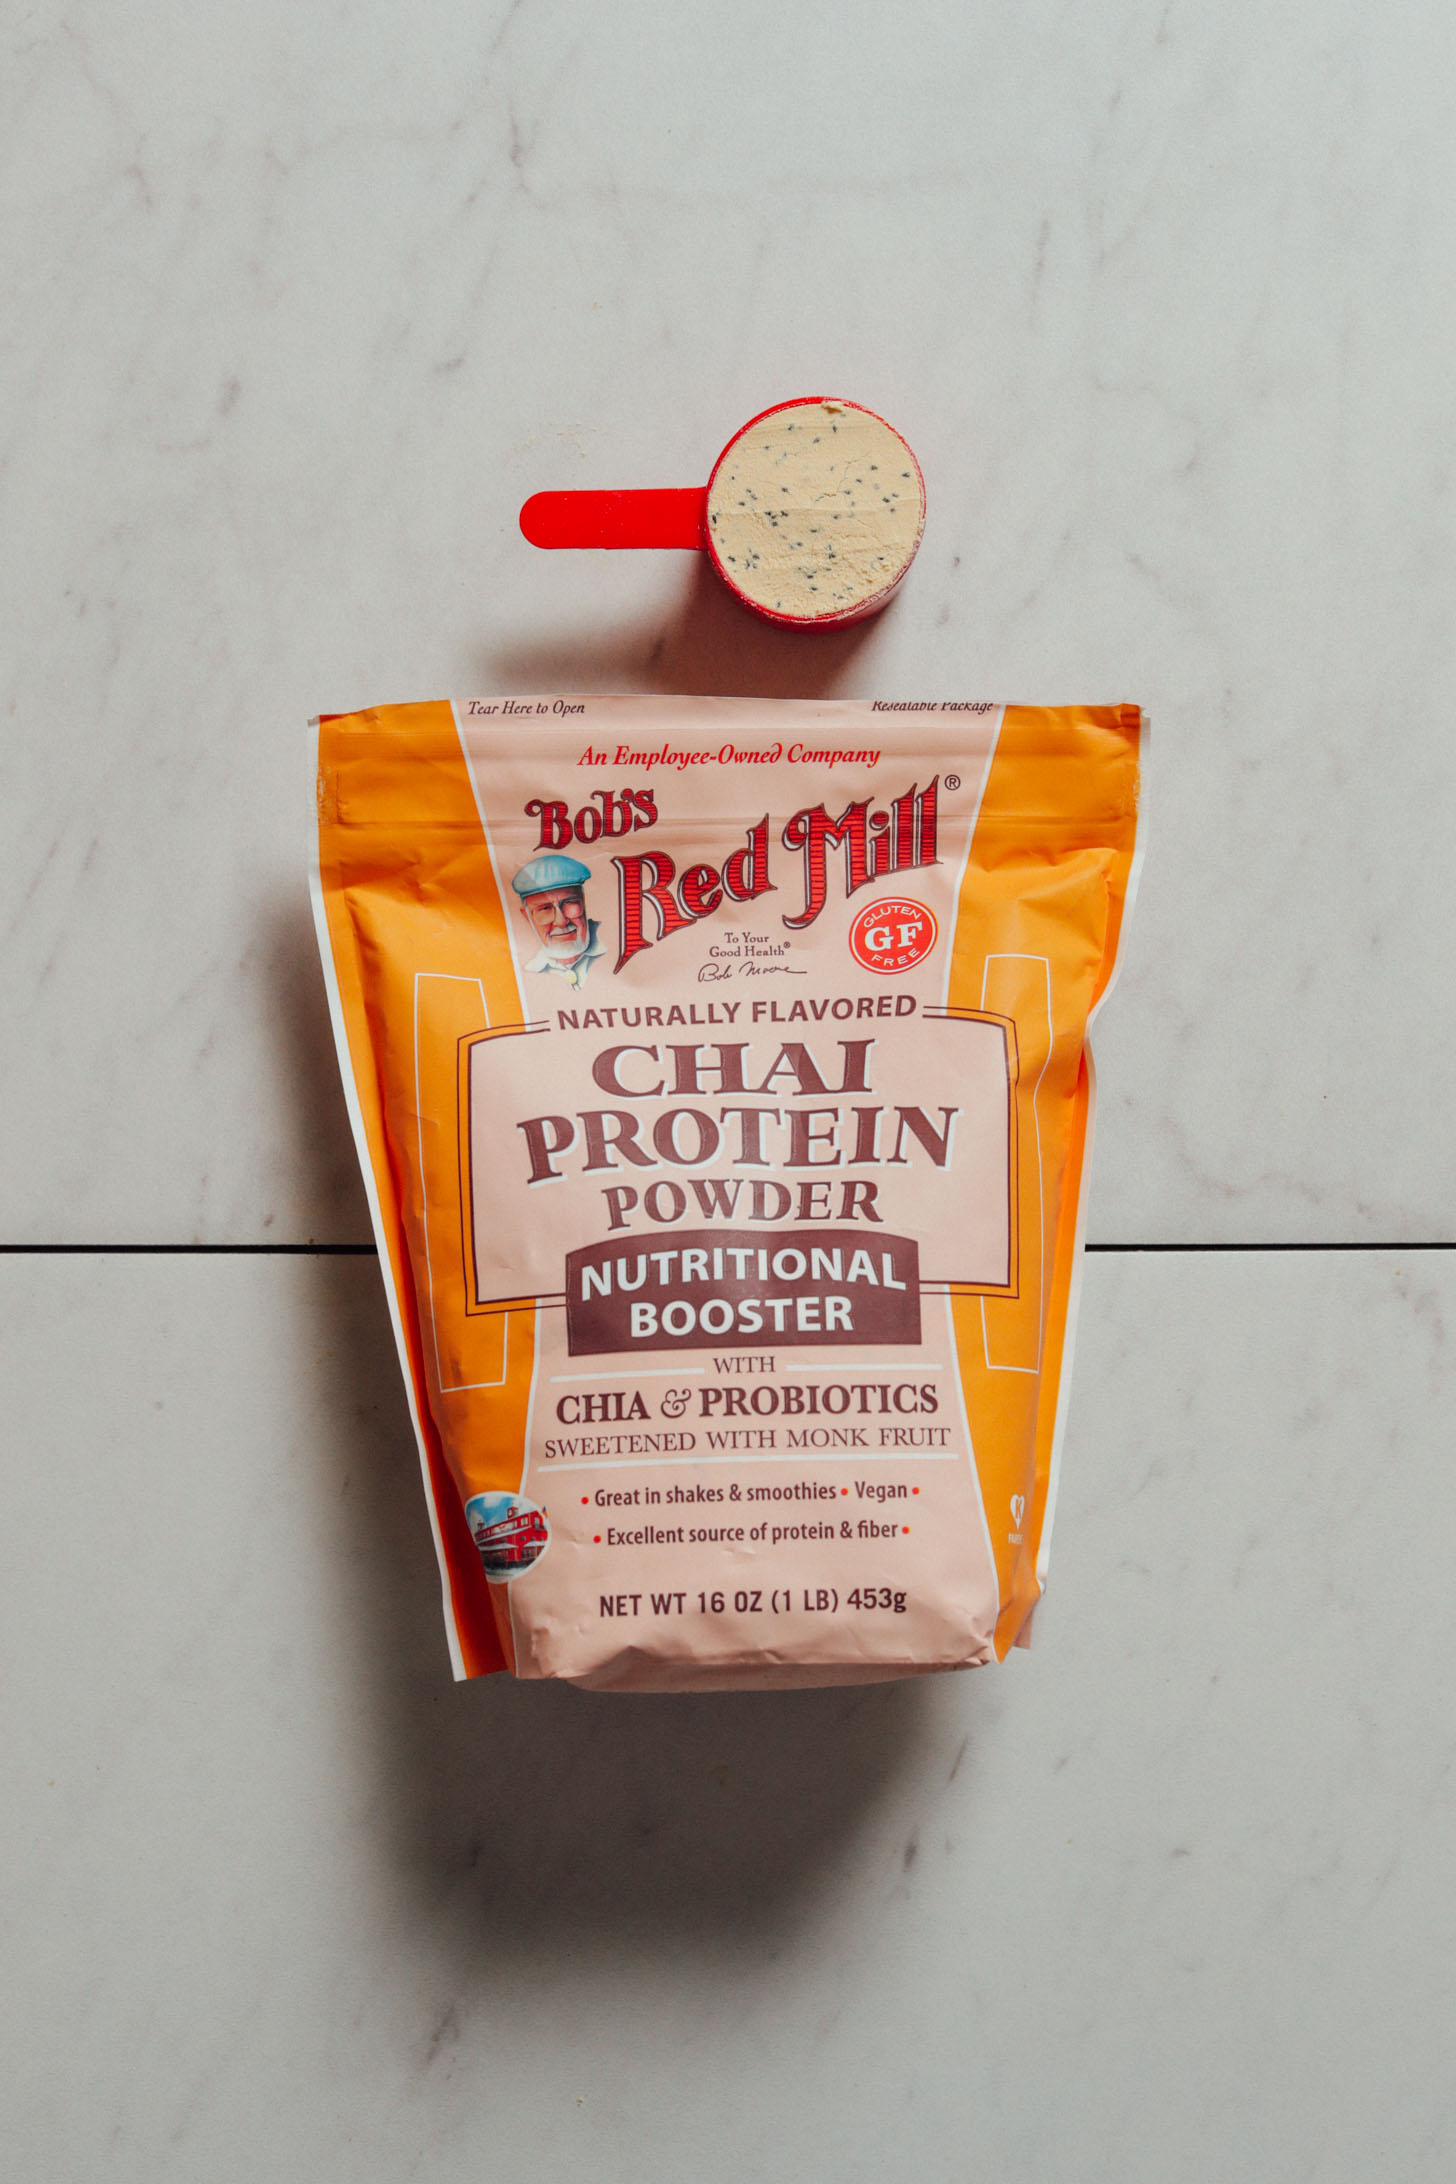 Scoop and pouch of Bob's Red Mill Chai Protein Powder for our review